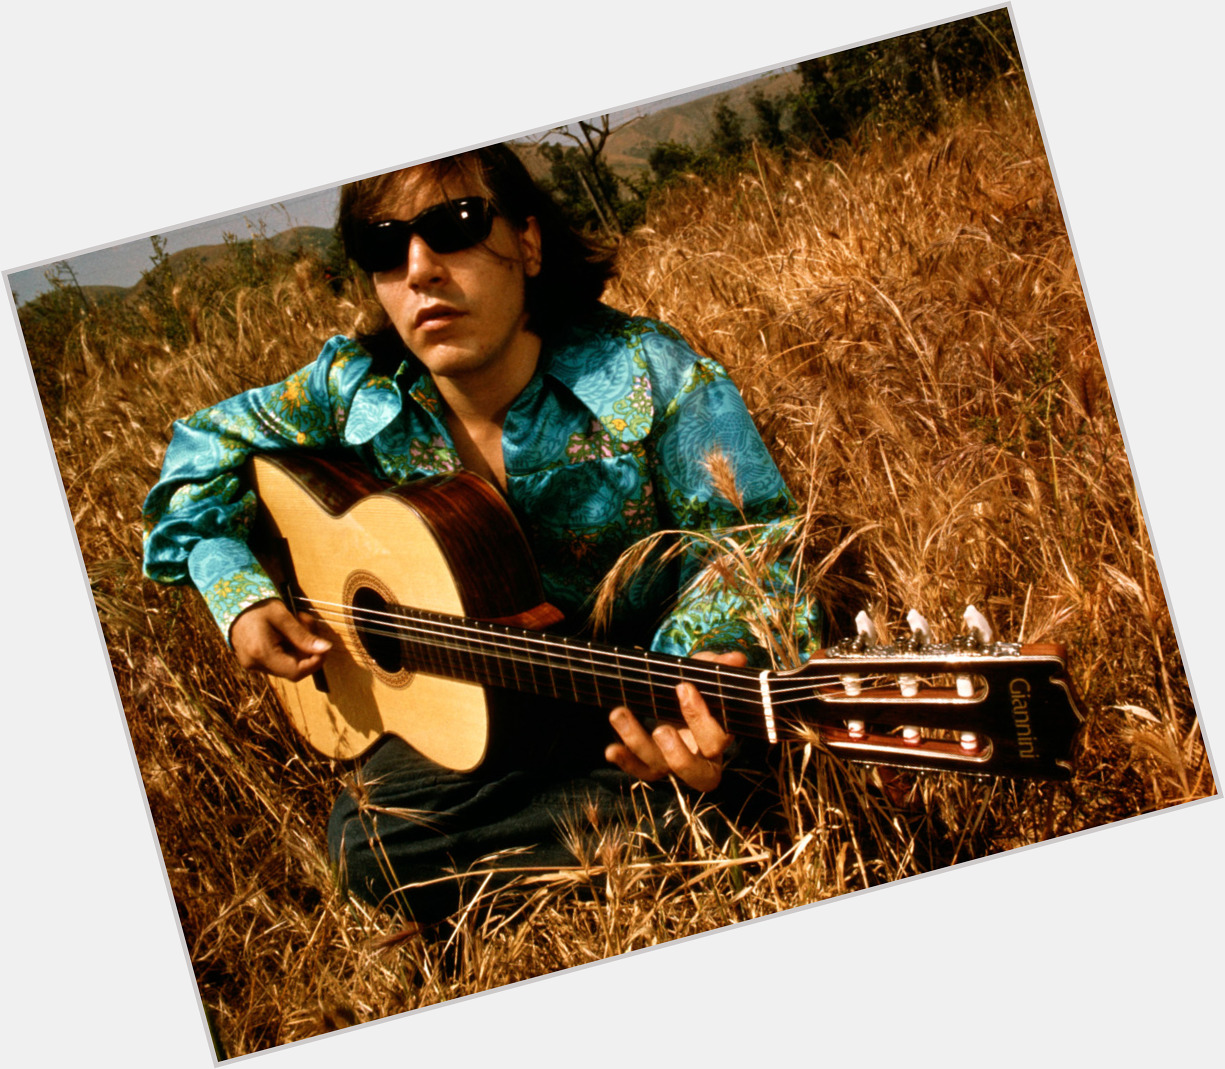 Happy Birthday to José Feliciano who turns 76 years young today 